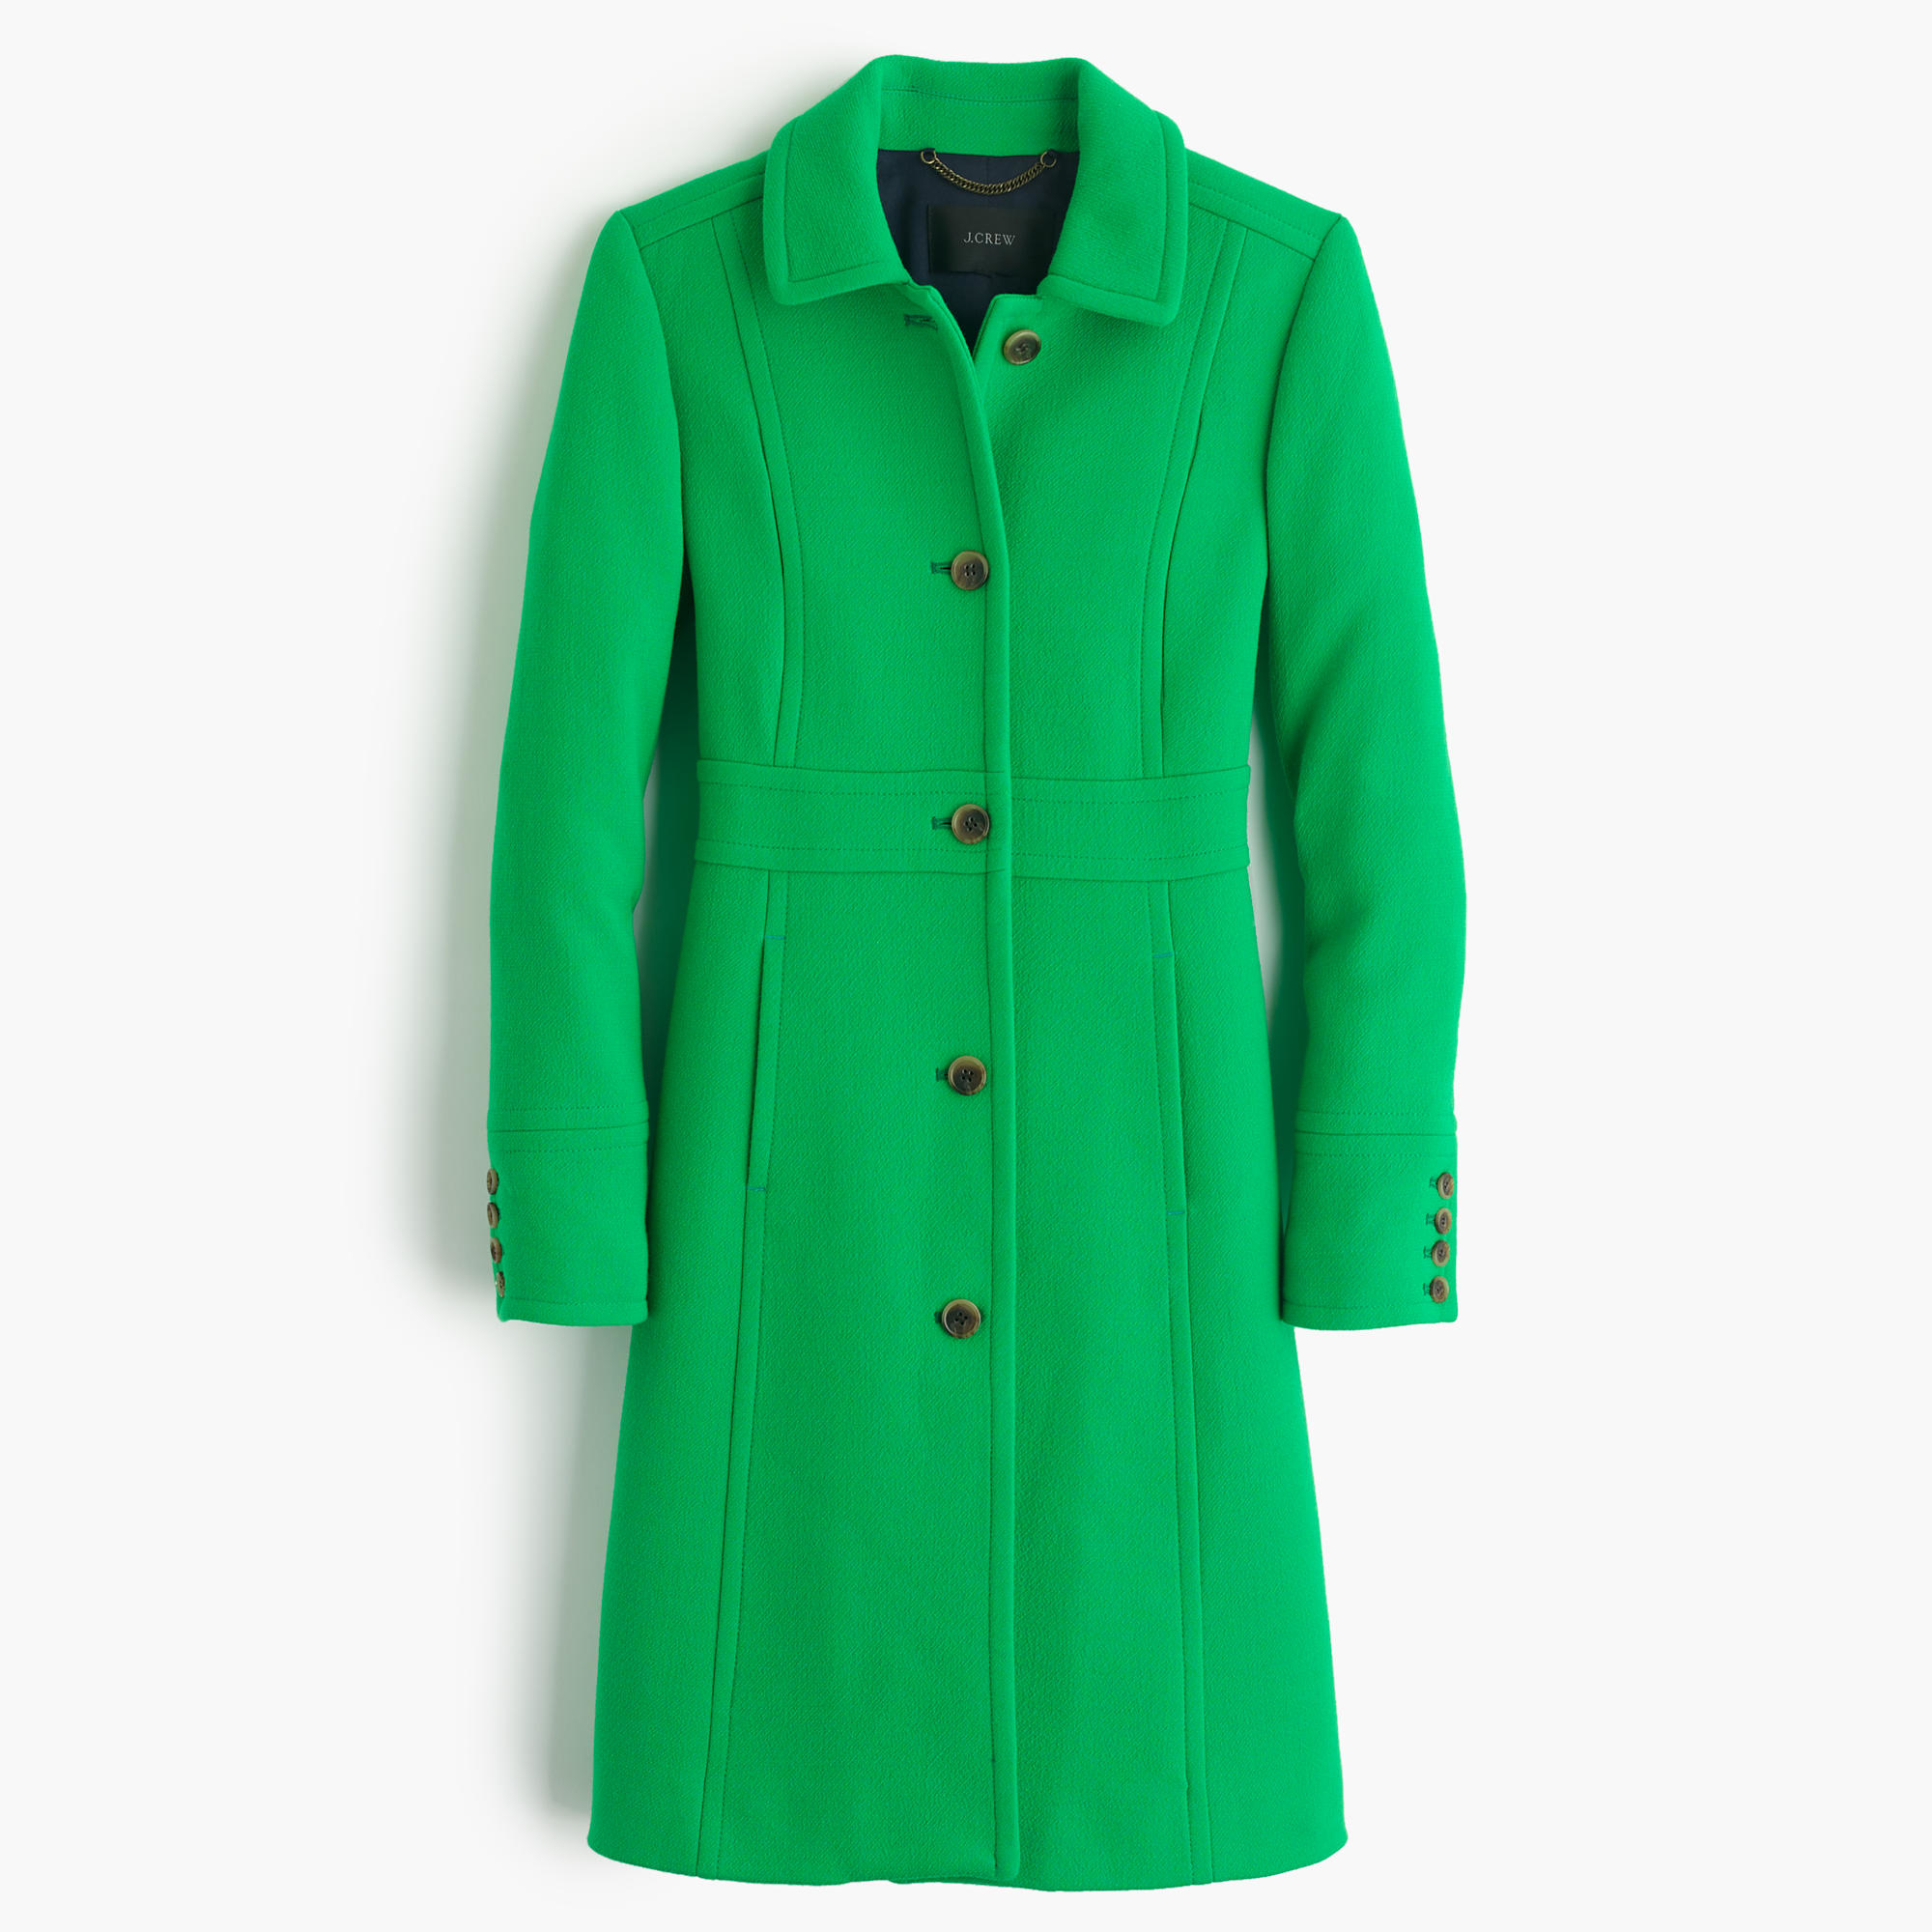 J.crew Double-cloth Lady Day Coat With Thinsulate in Green (coastal